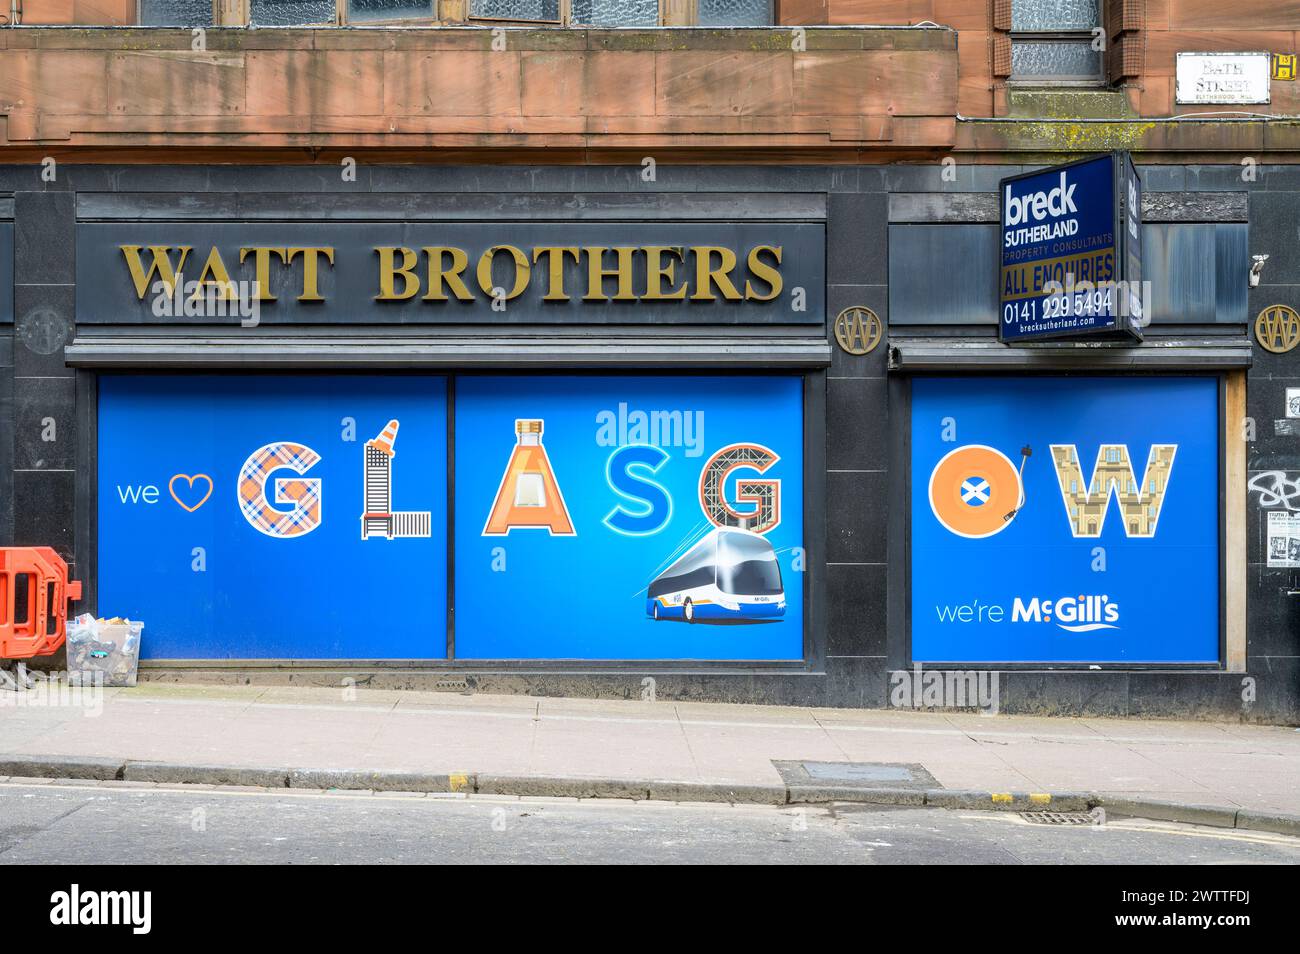 McGill's Bus Company advertising on the window of the former Watt Brothers Department store, Bath Street, Glasgow, Scotland, UK, Europe Stock Photo